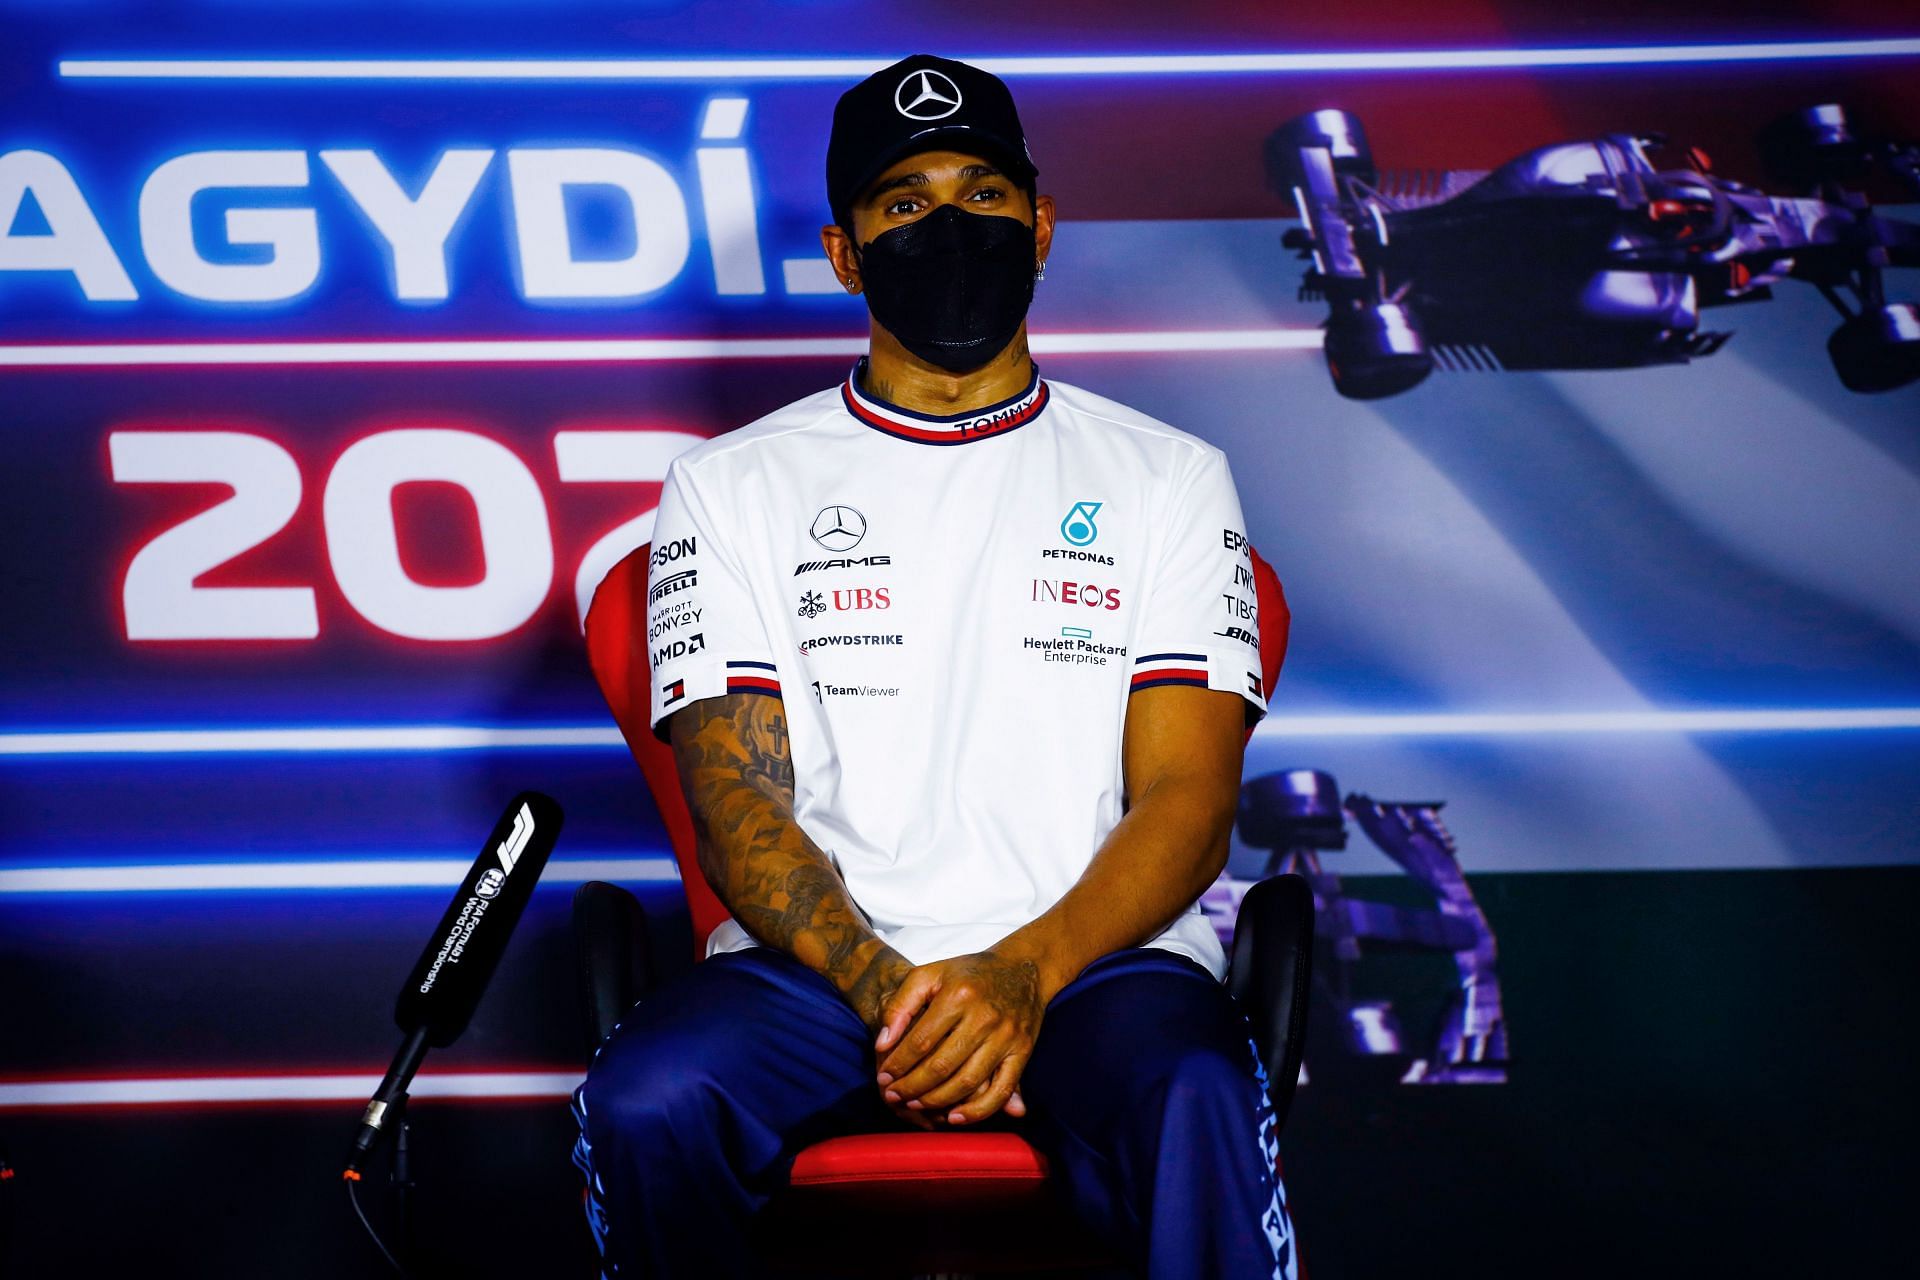 F1 Grand Prix of Hungary - Lewis Hamilton attends the press conference (Photo by Xavi Bonilla - Pool/Getty Images)